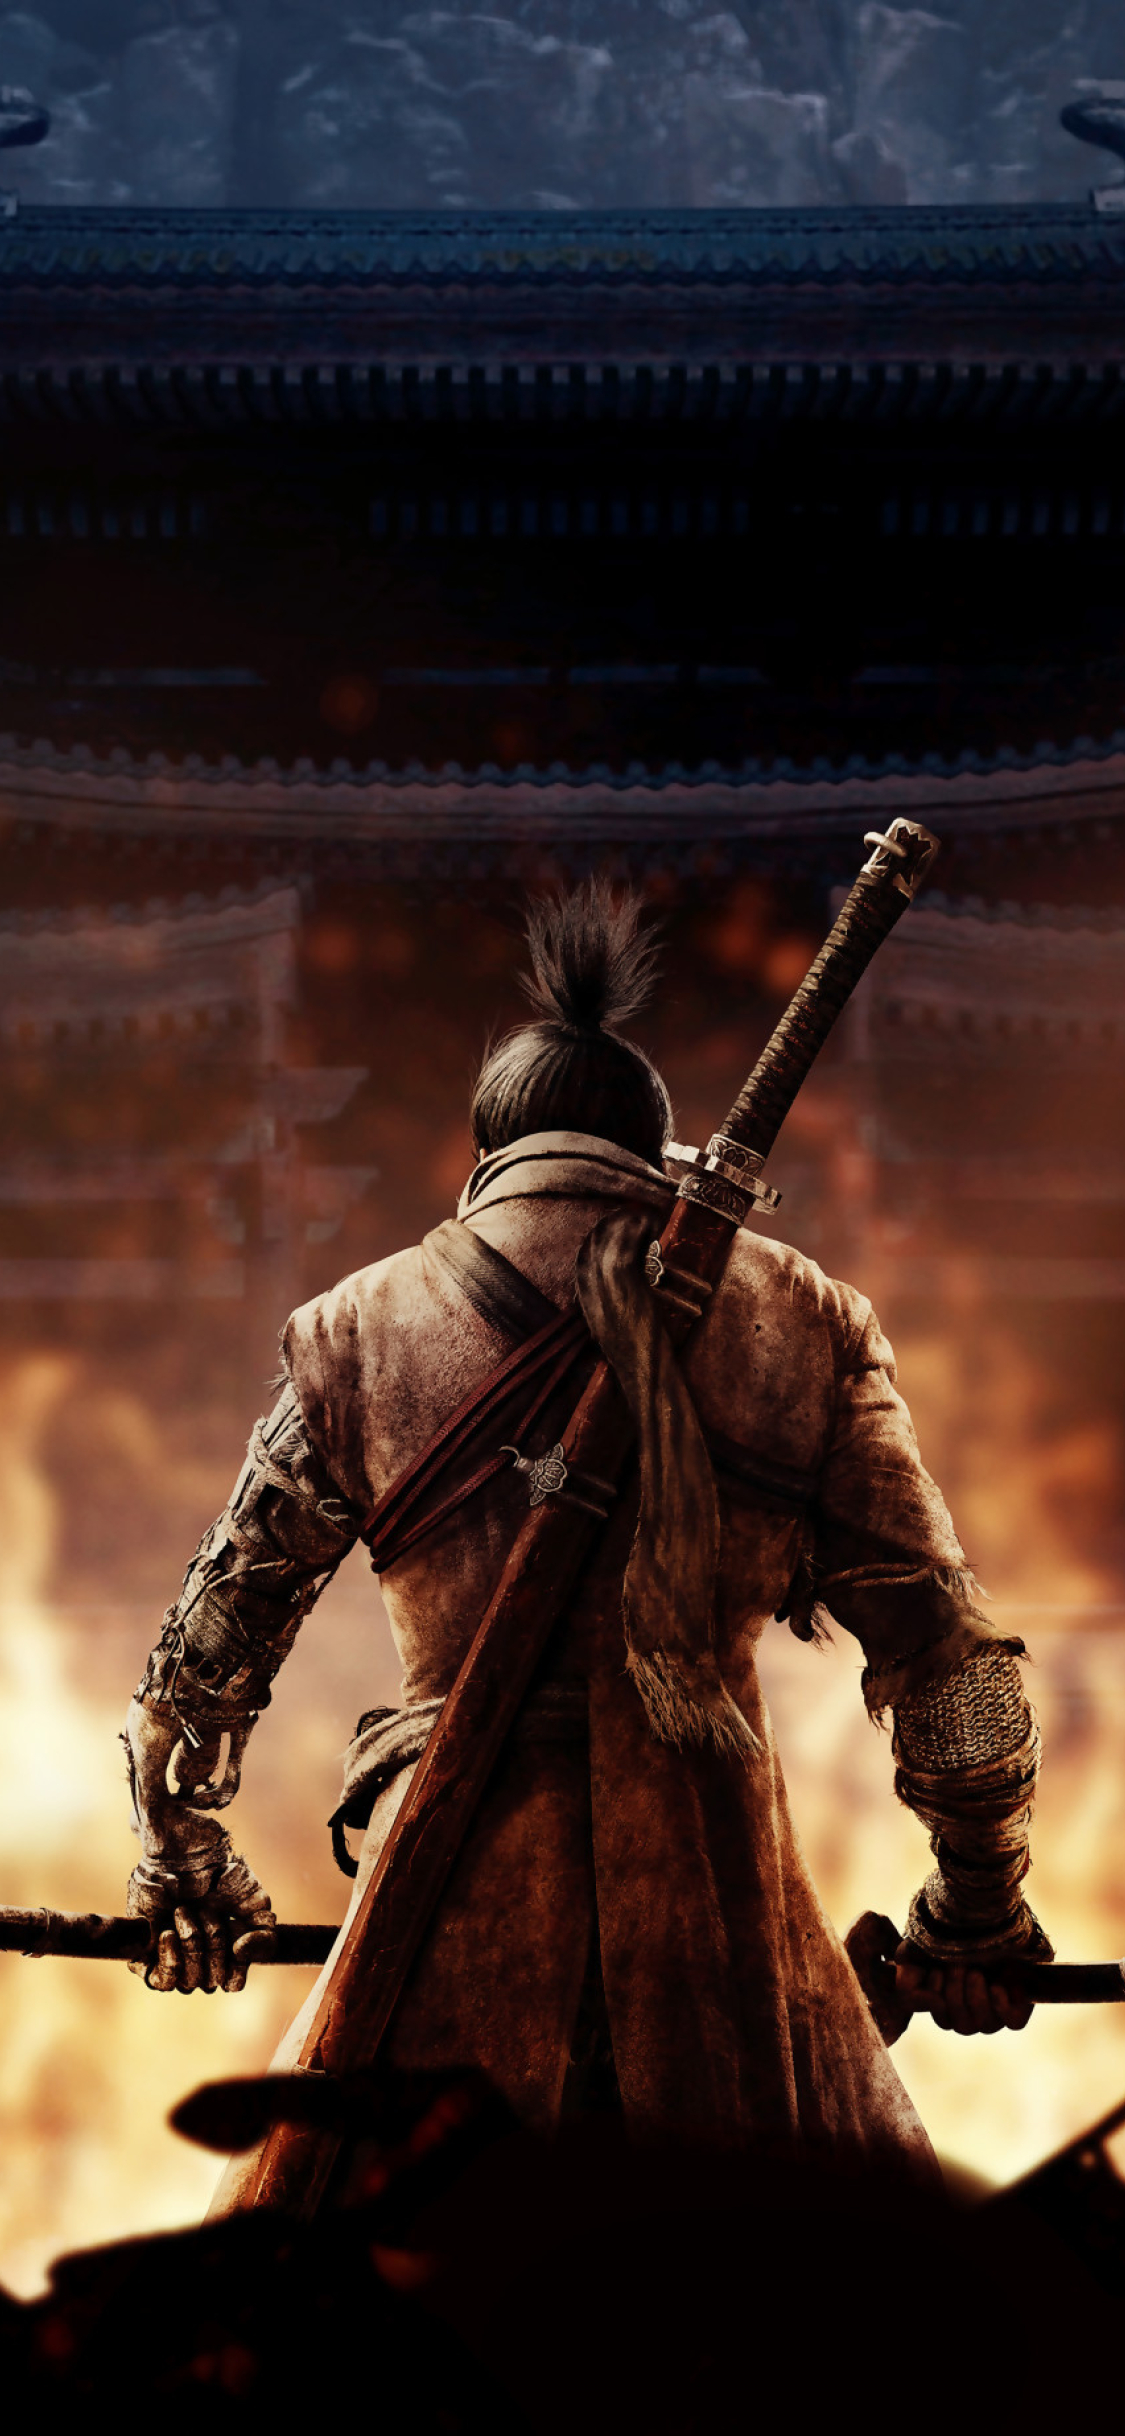 download games like sekiro for free